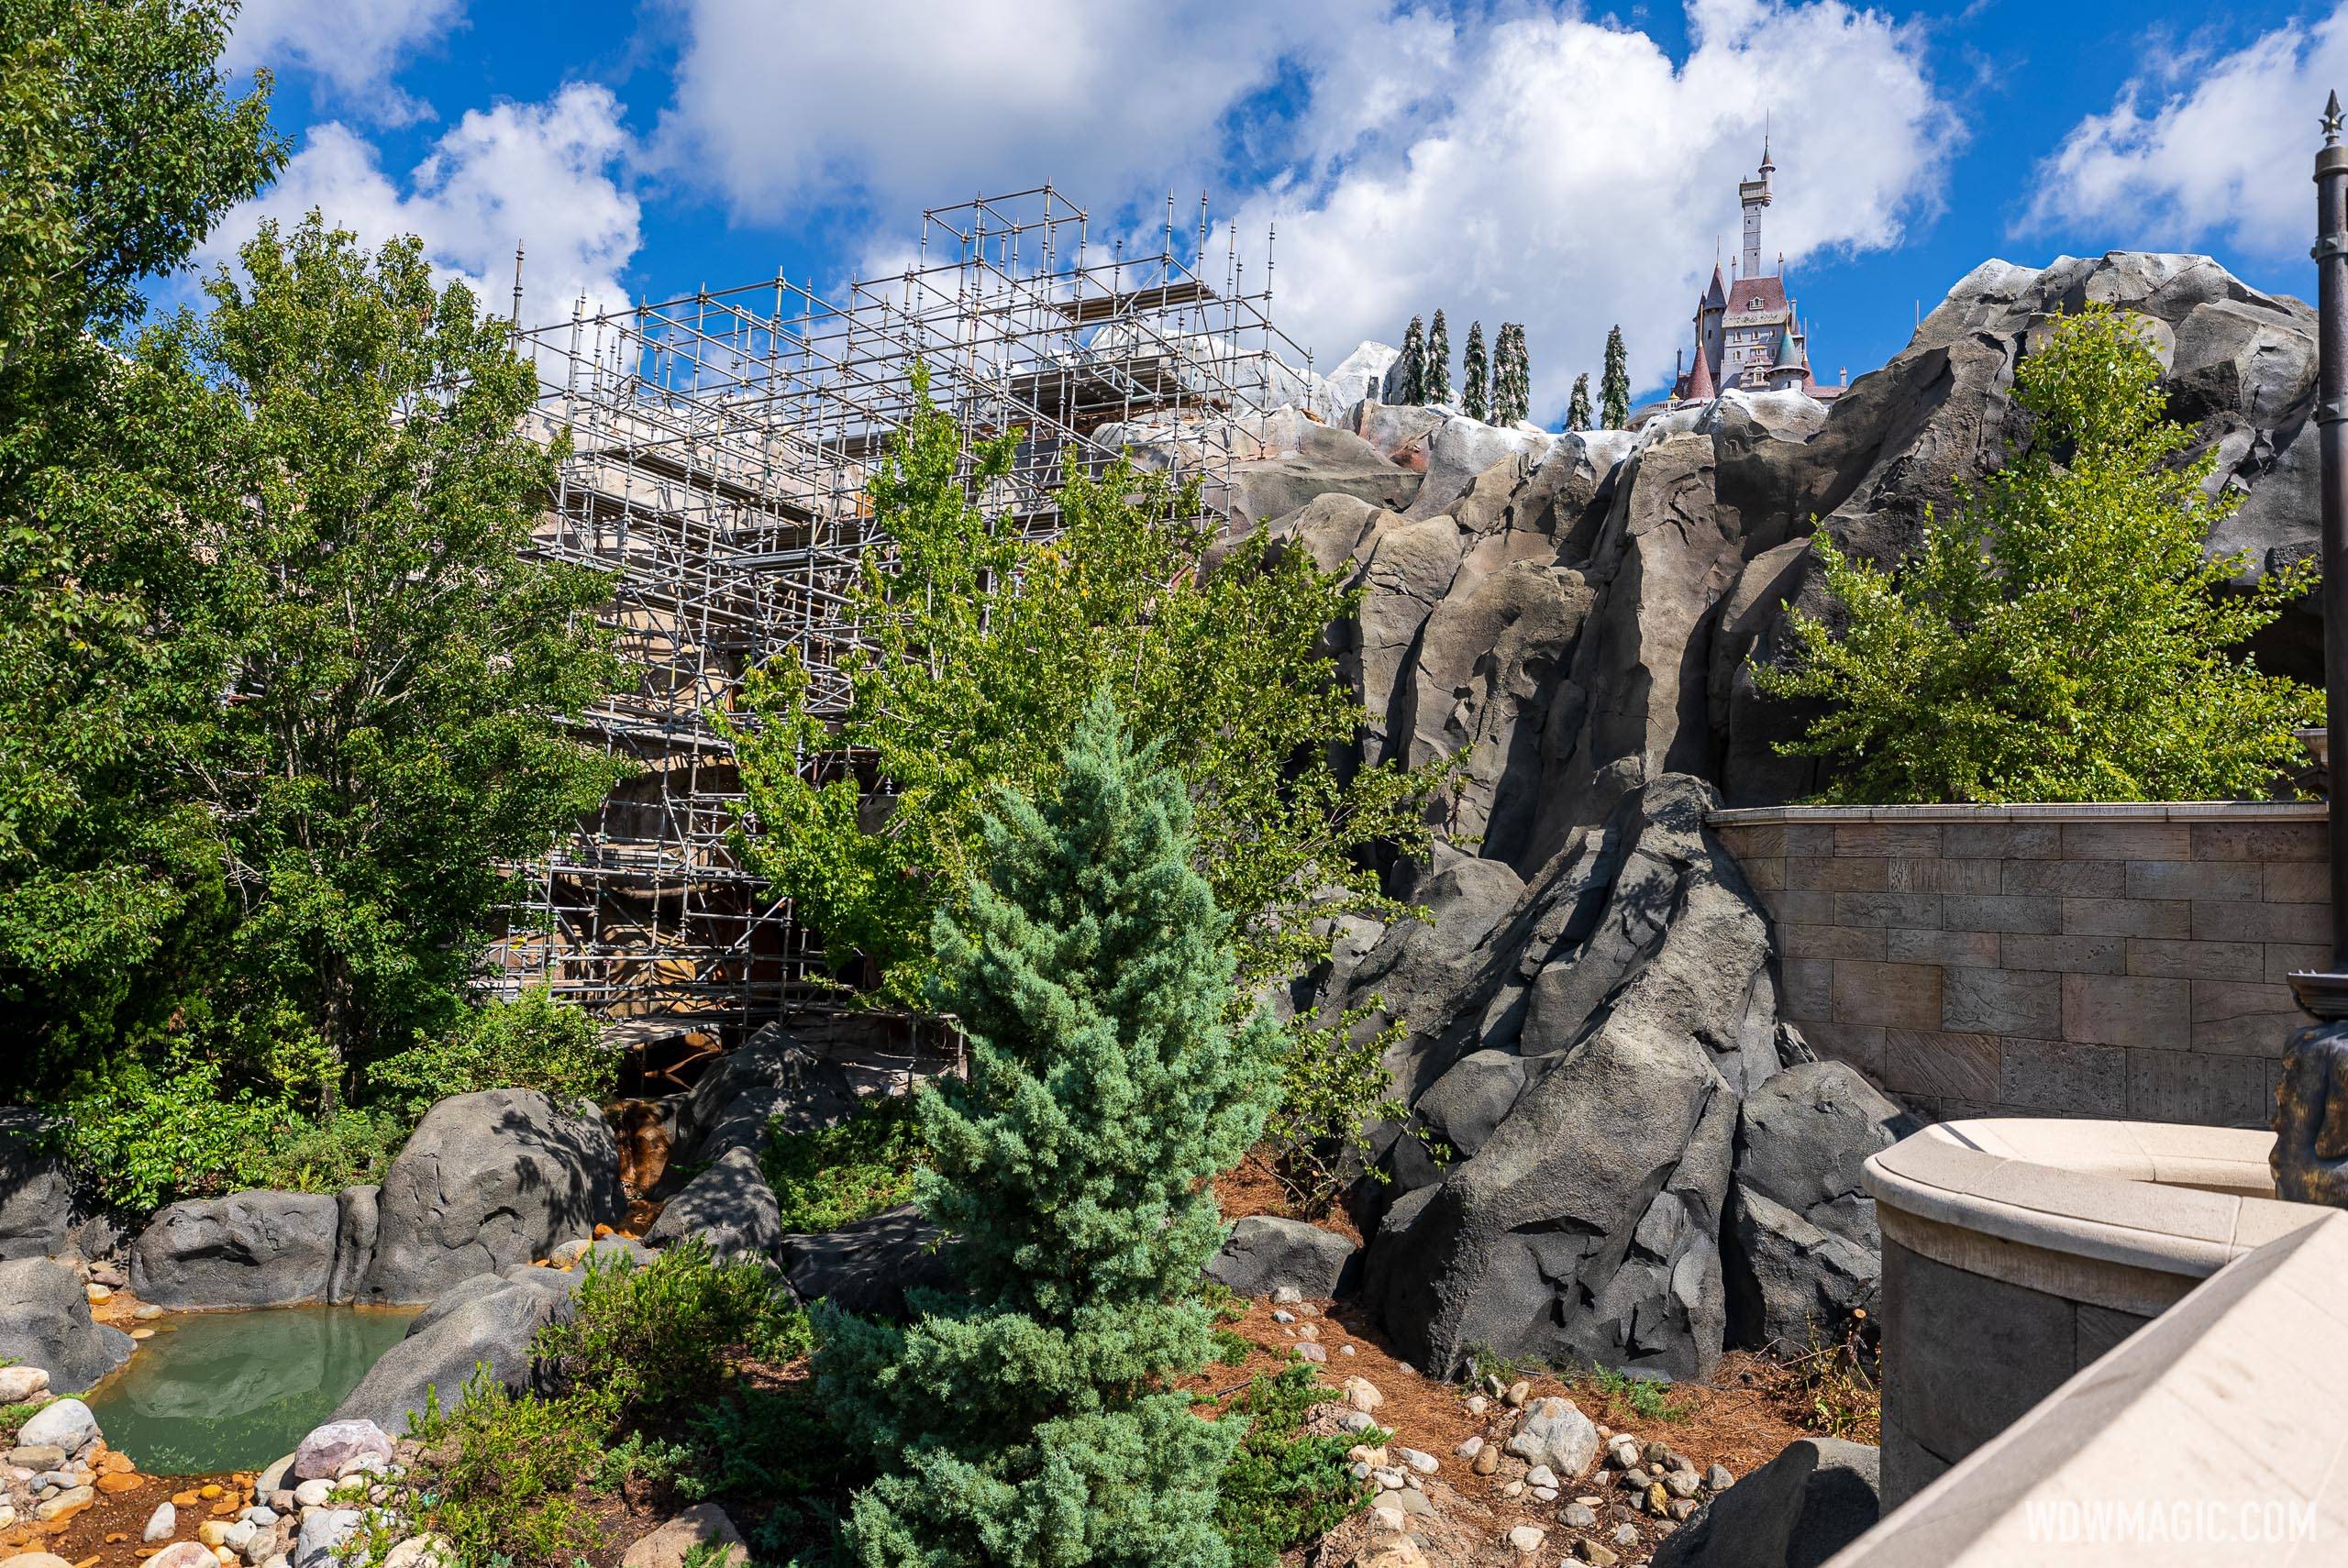 Be Our Guest exterior refurbishment - July 21 2021